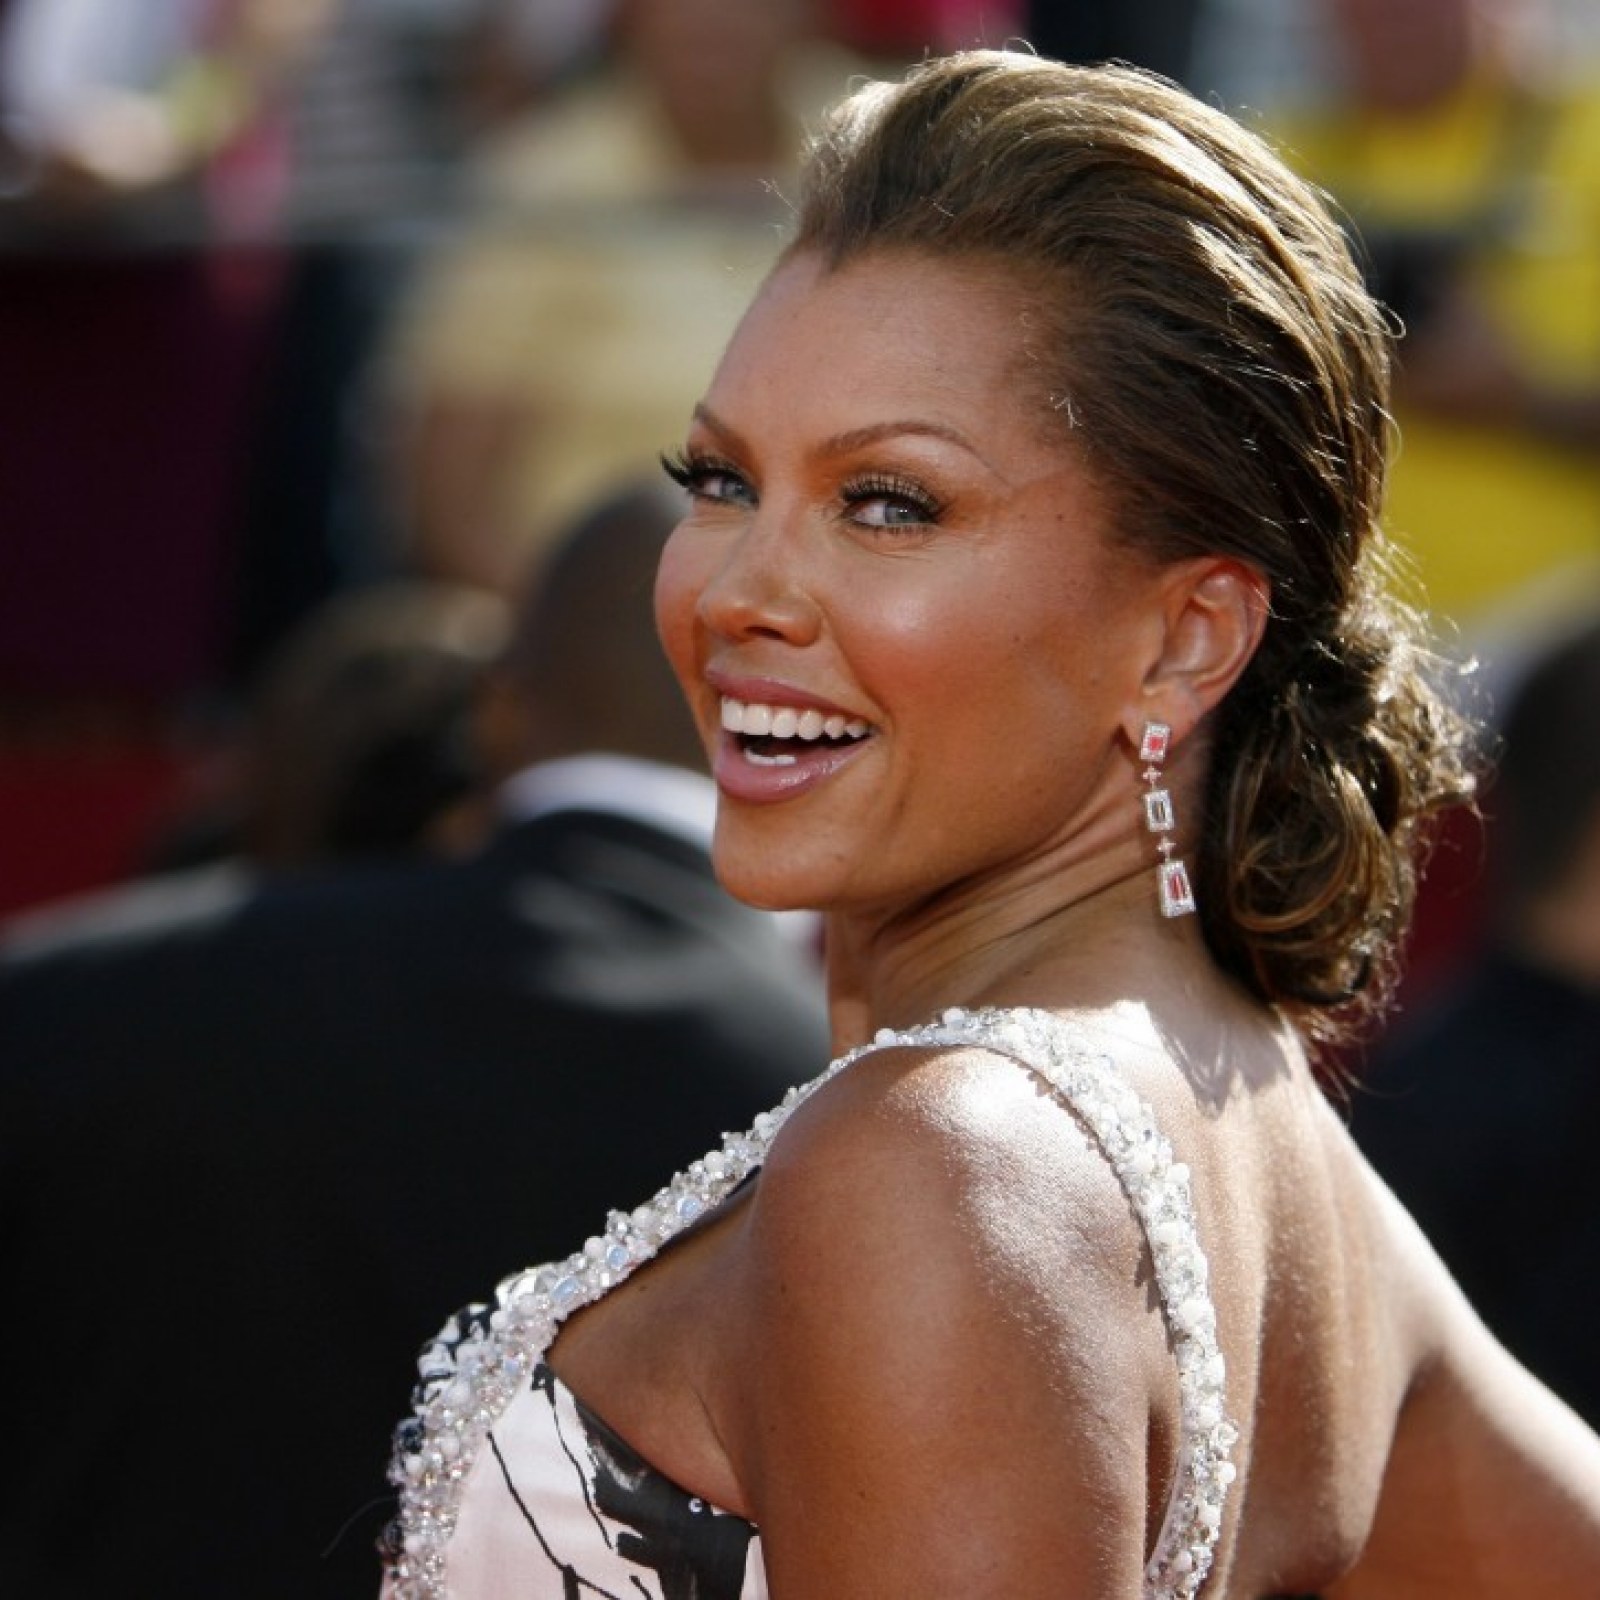 actress-vanessa-williams-arrives-60th-annual-primetime-emmy-awards-los-angeles.jpg